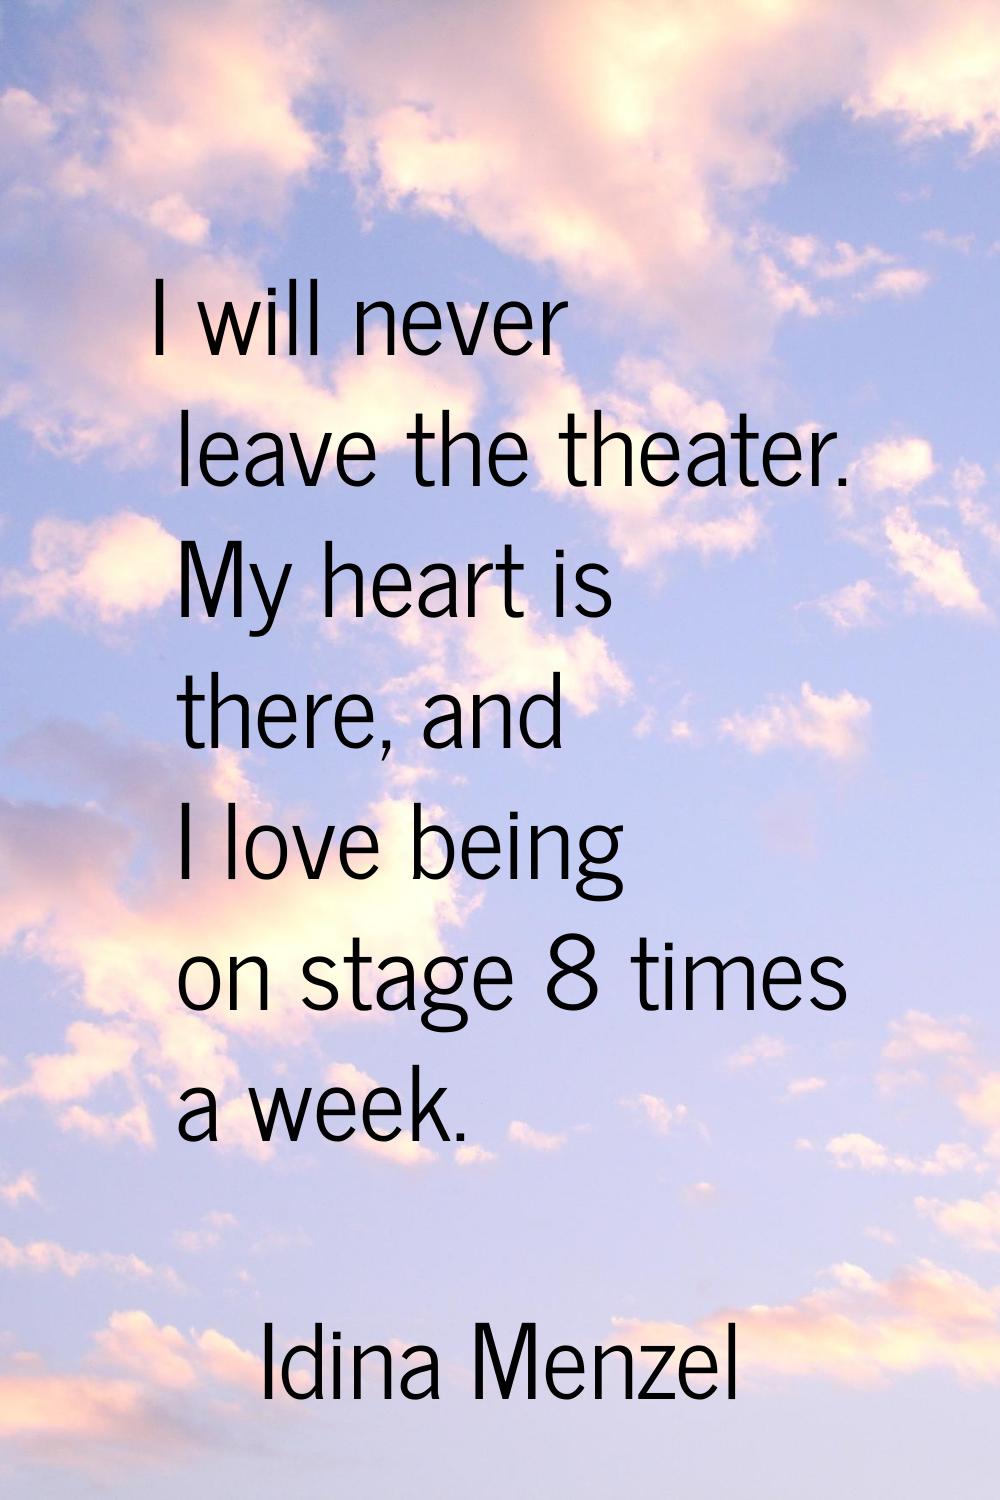 I will never leave the theater. My heart is there, and I love being on stage 8 times a week.